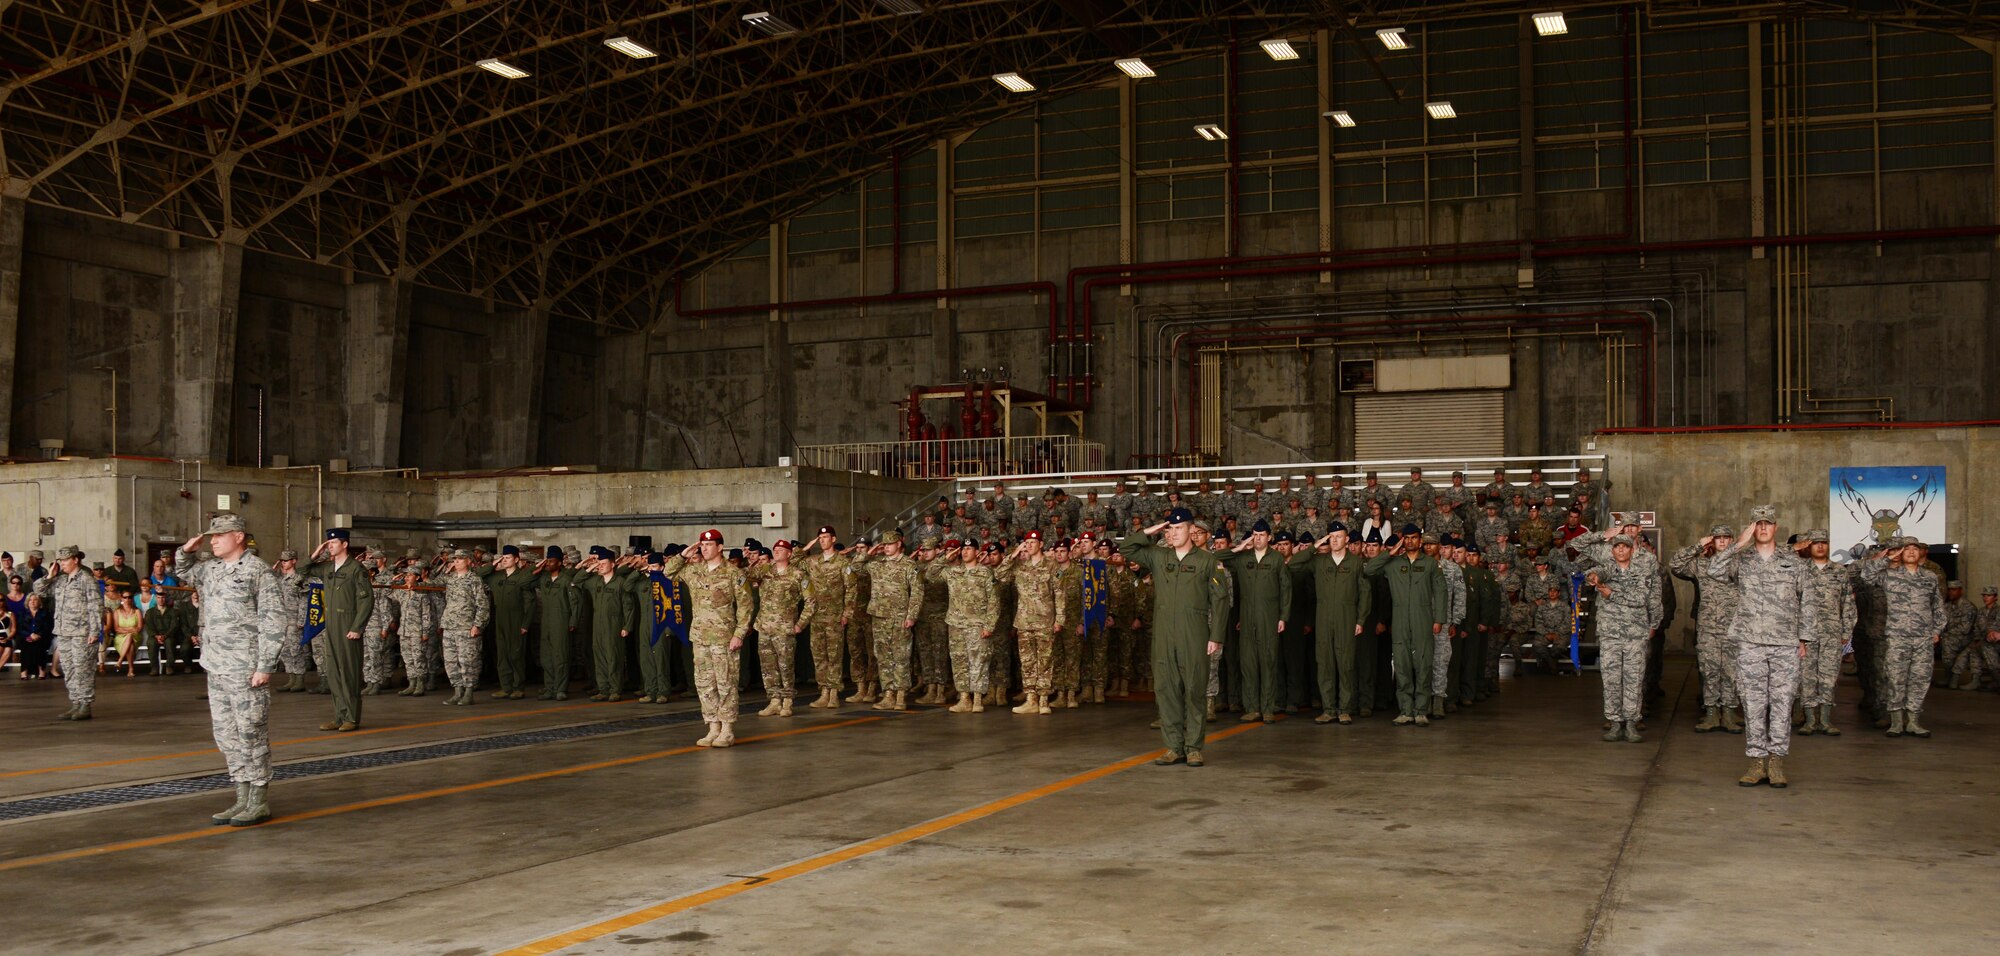 Members of the 353rd Special Operations Group render their first salute to their new commander, Col. William C. Freeman during an assumption of command ceremony May 8, 2016 on Kadena Air Base, Japan.  The 353rd SOG is the Air Force’s only special operations unit in the Pacific. (U.S. Air Force photo by Tech. Sgt. Kristine Dreyer)